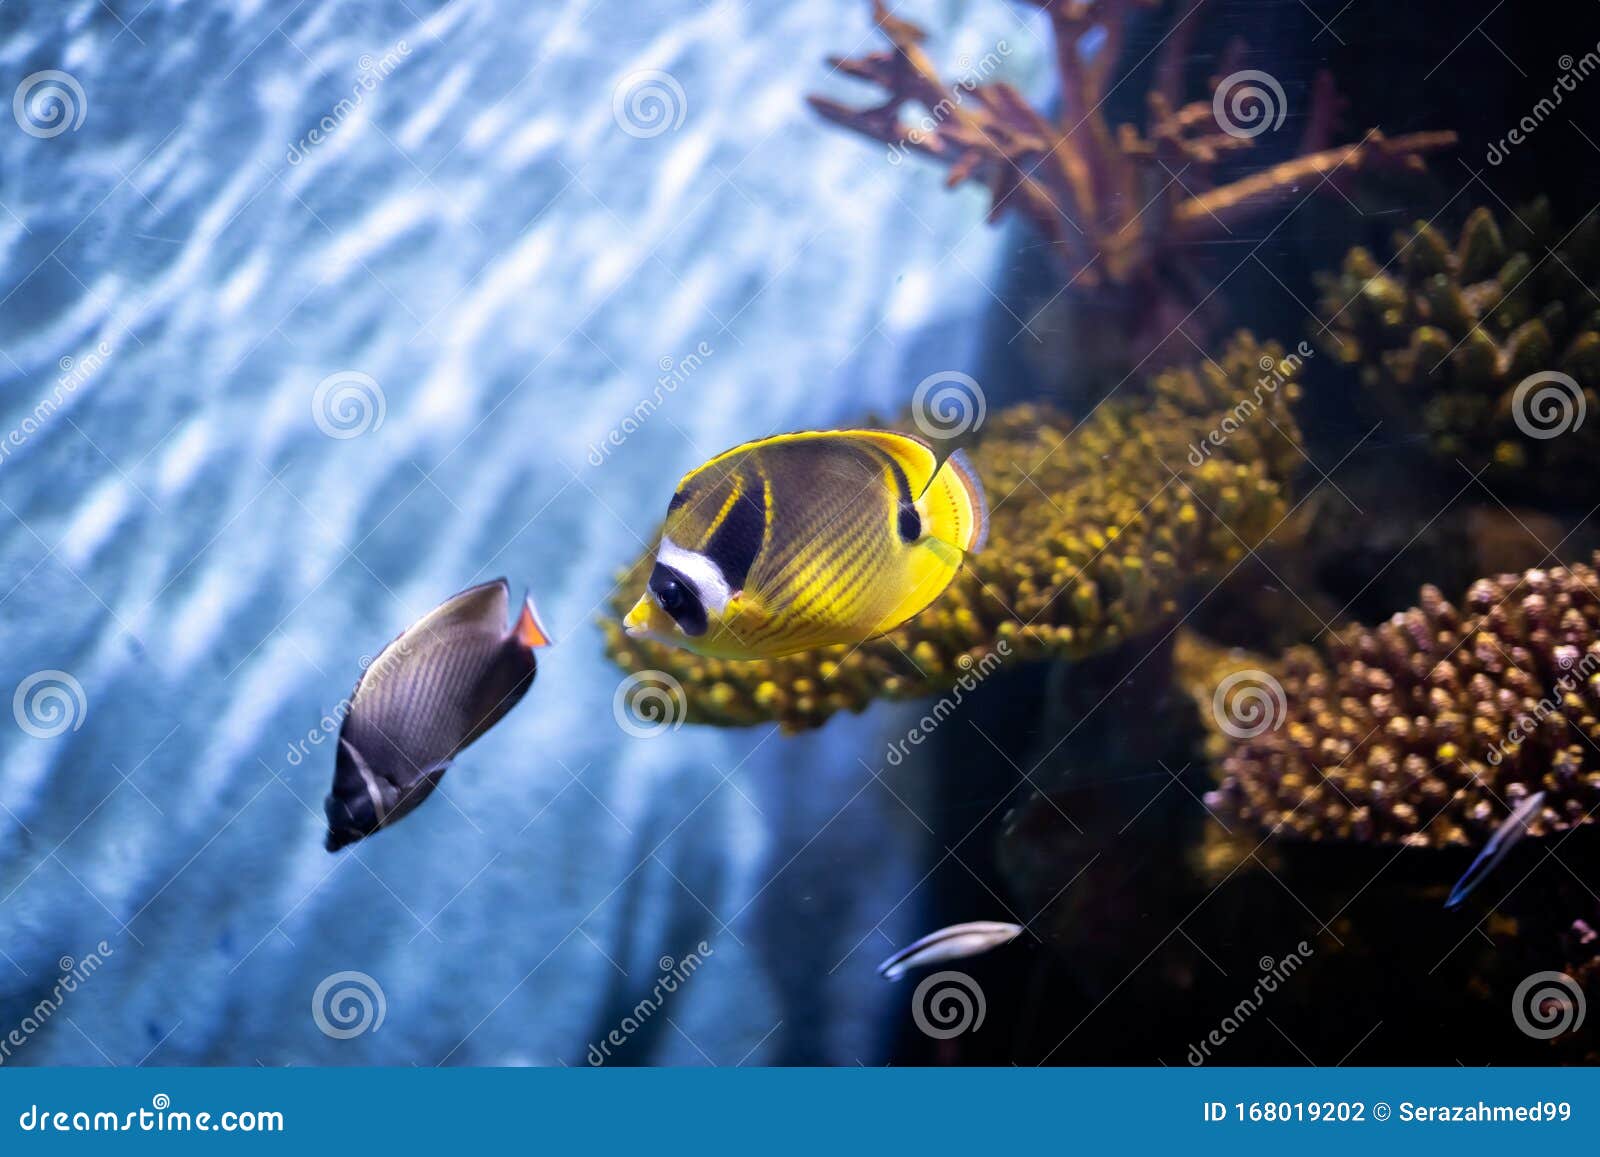 raccoon butterflyfish, also known as the crescent-masked butterflyfish, lunule butterflyfish, moon butterflyfish chaetodon lunula